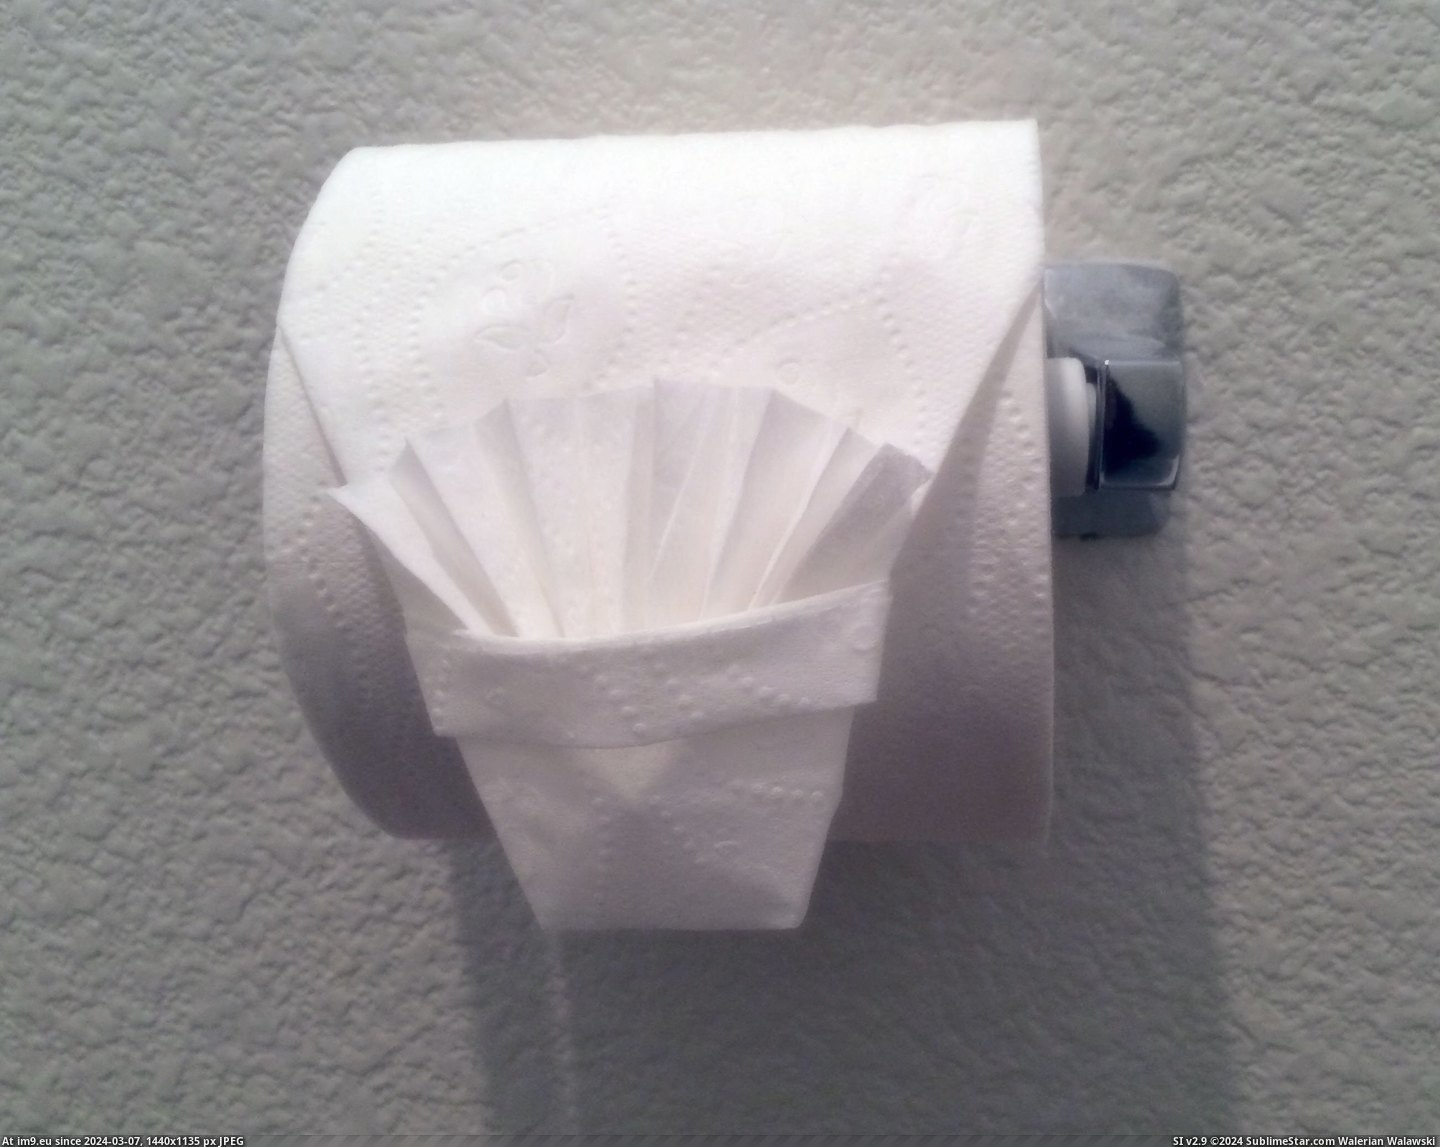 #Funny #Big #Fancy #Kidding #Parties #Origami #Ing #Houses #Guests [Funny] Whenever I go to parties at big fancy houses, I origami the TP so other guests are like 'Are you f-ing kidding me?' Pic. (Obraz z album My r/FUNNY favs))